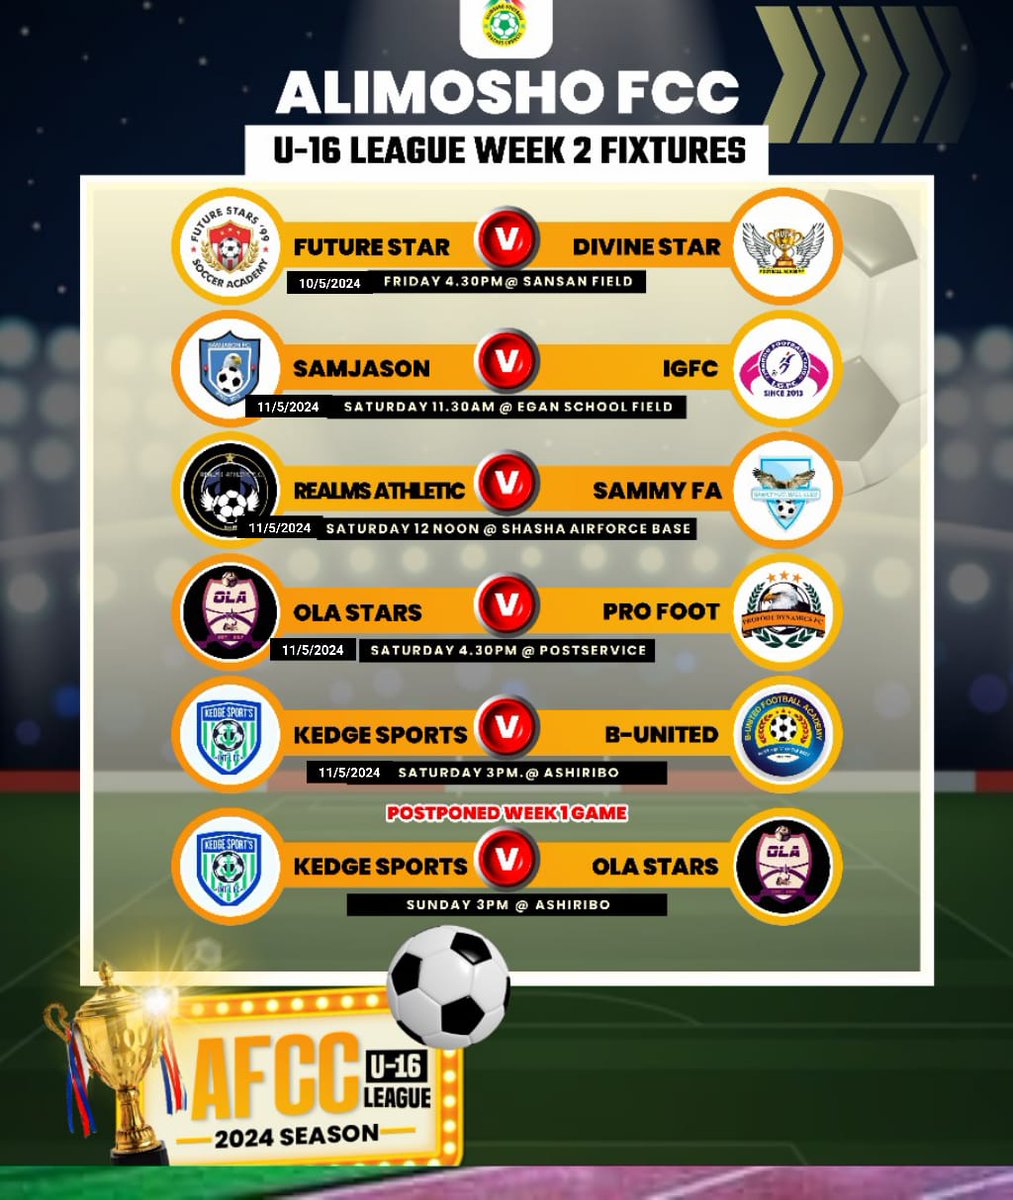 Another thrilling fixtures to see in the Alimosho FCC U-16 league on Friday, Saturday and a rescheduled game on Sunday.

#Alimosho #AFCC #Alimoshofootballleague